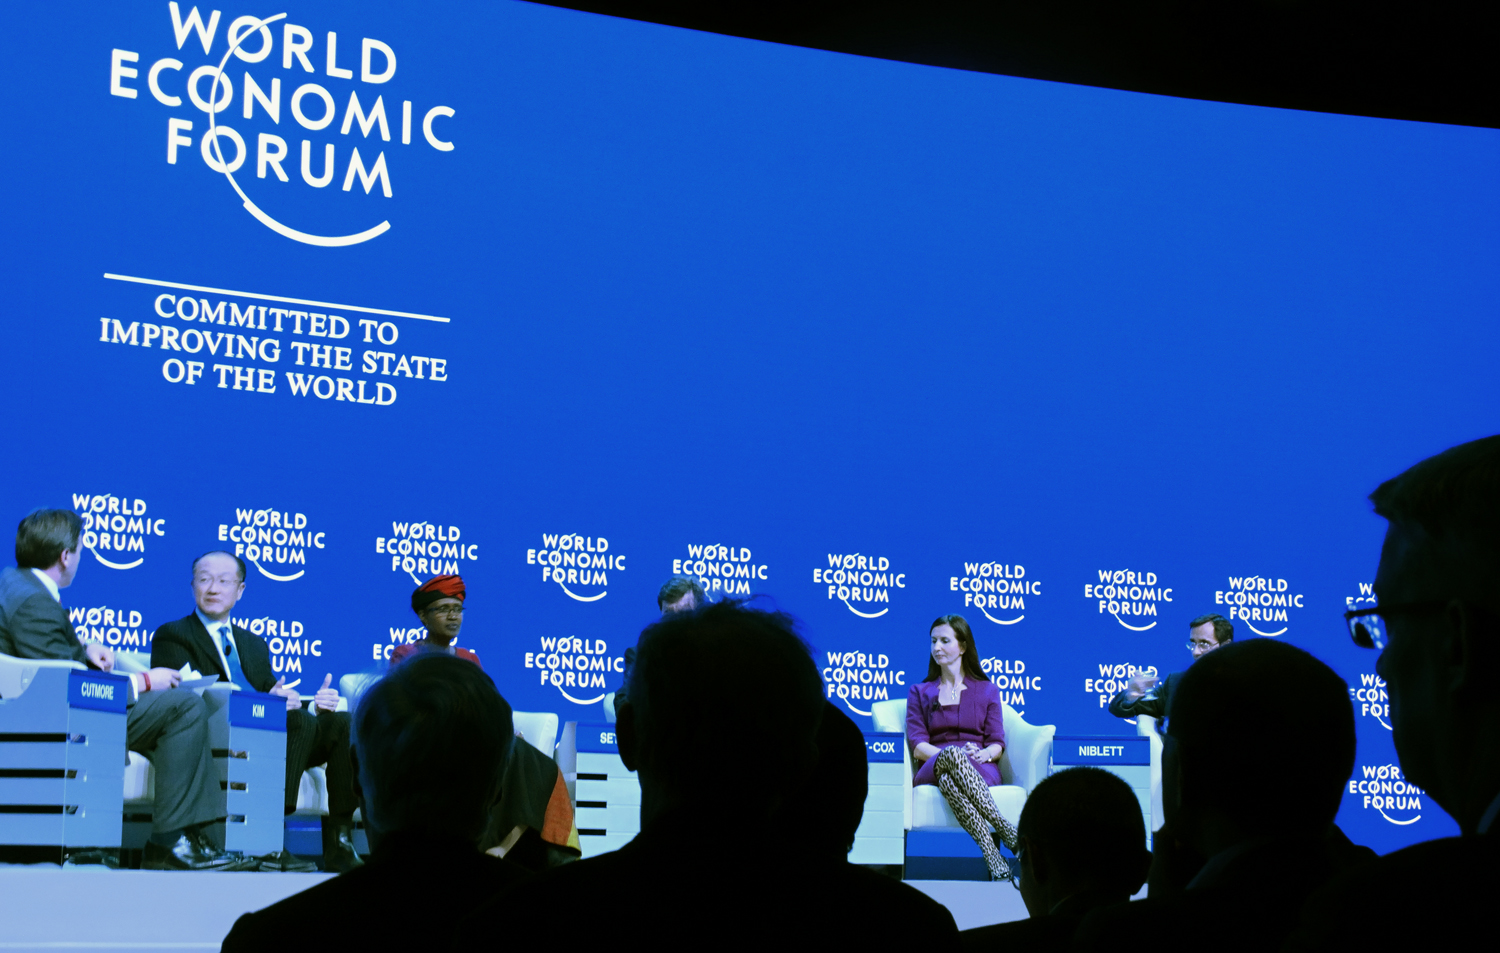 The World Economic Forum WEF Annual Meeting ended